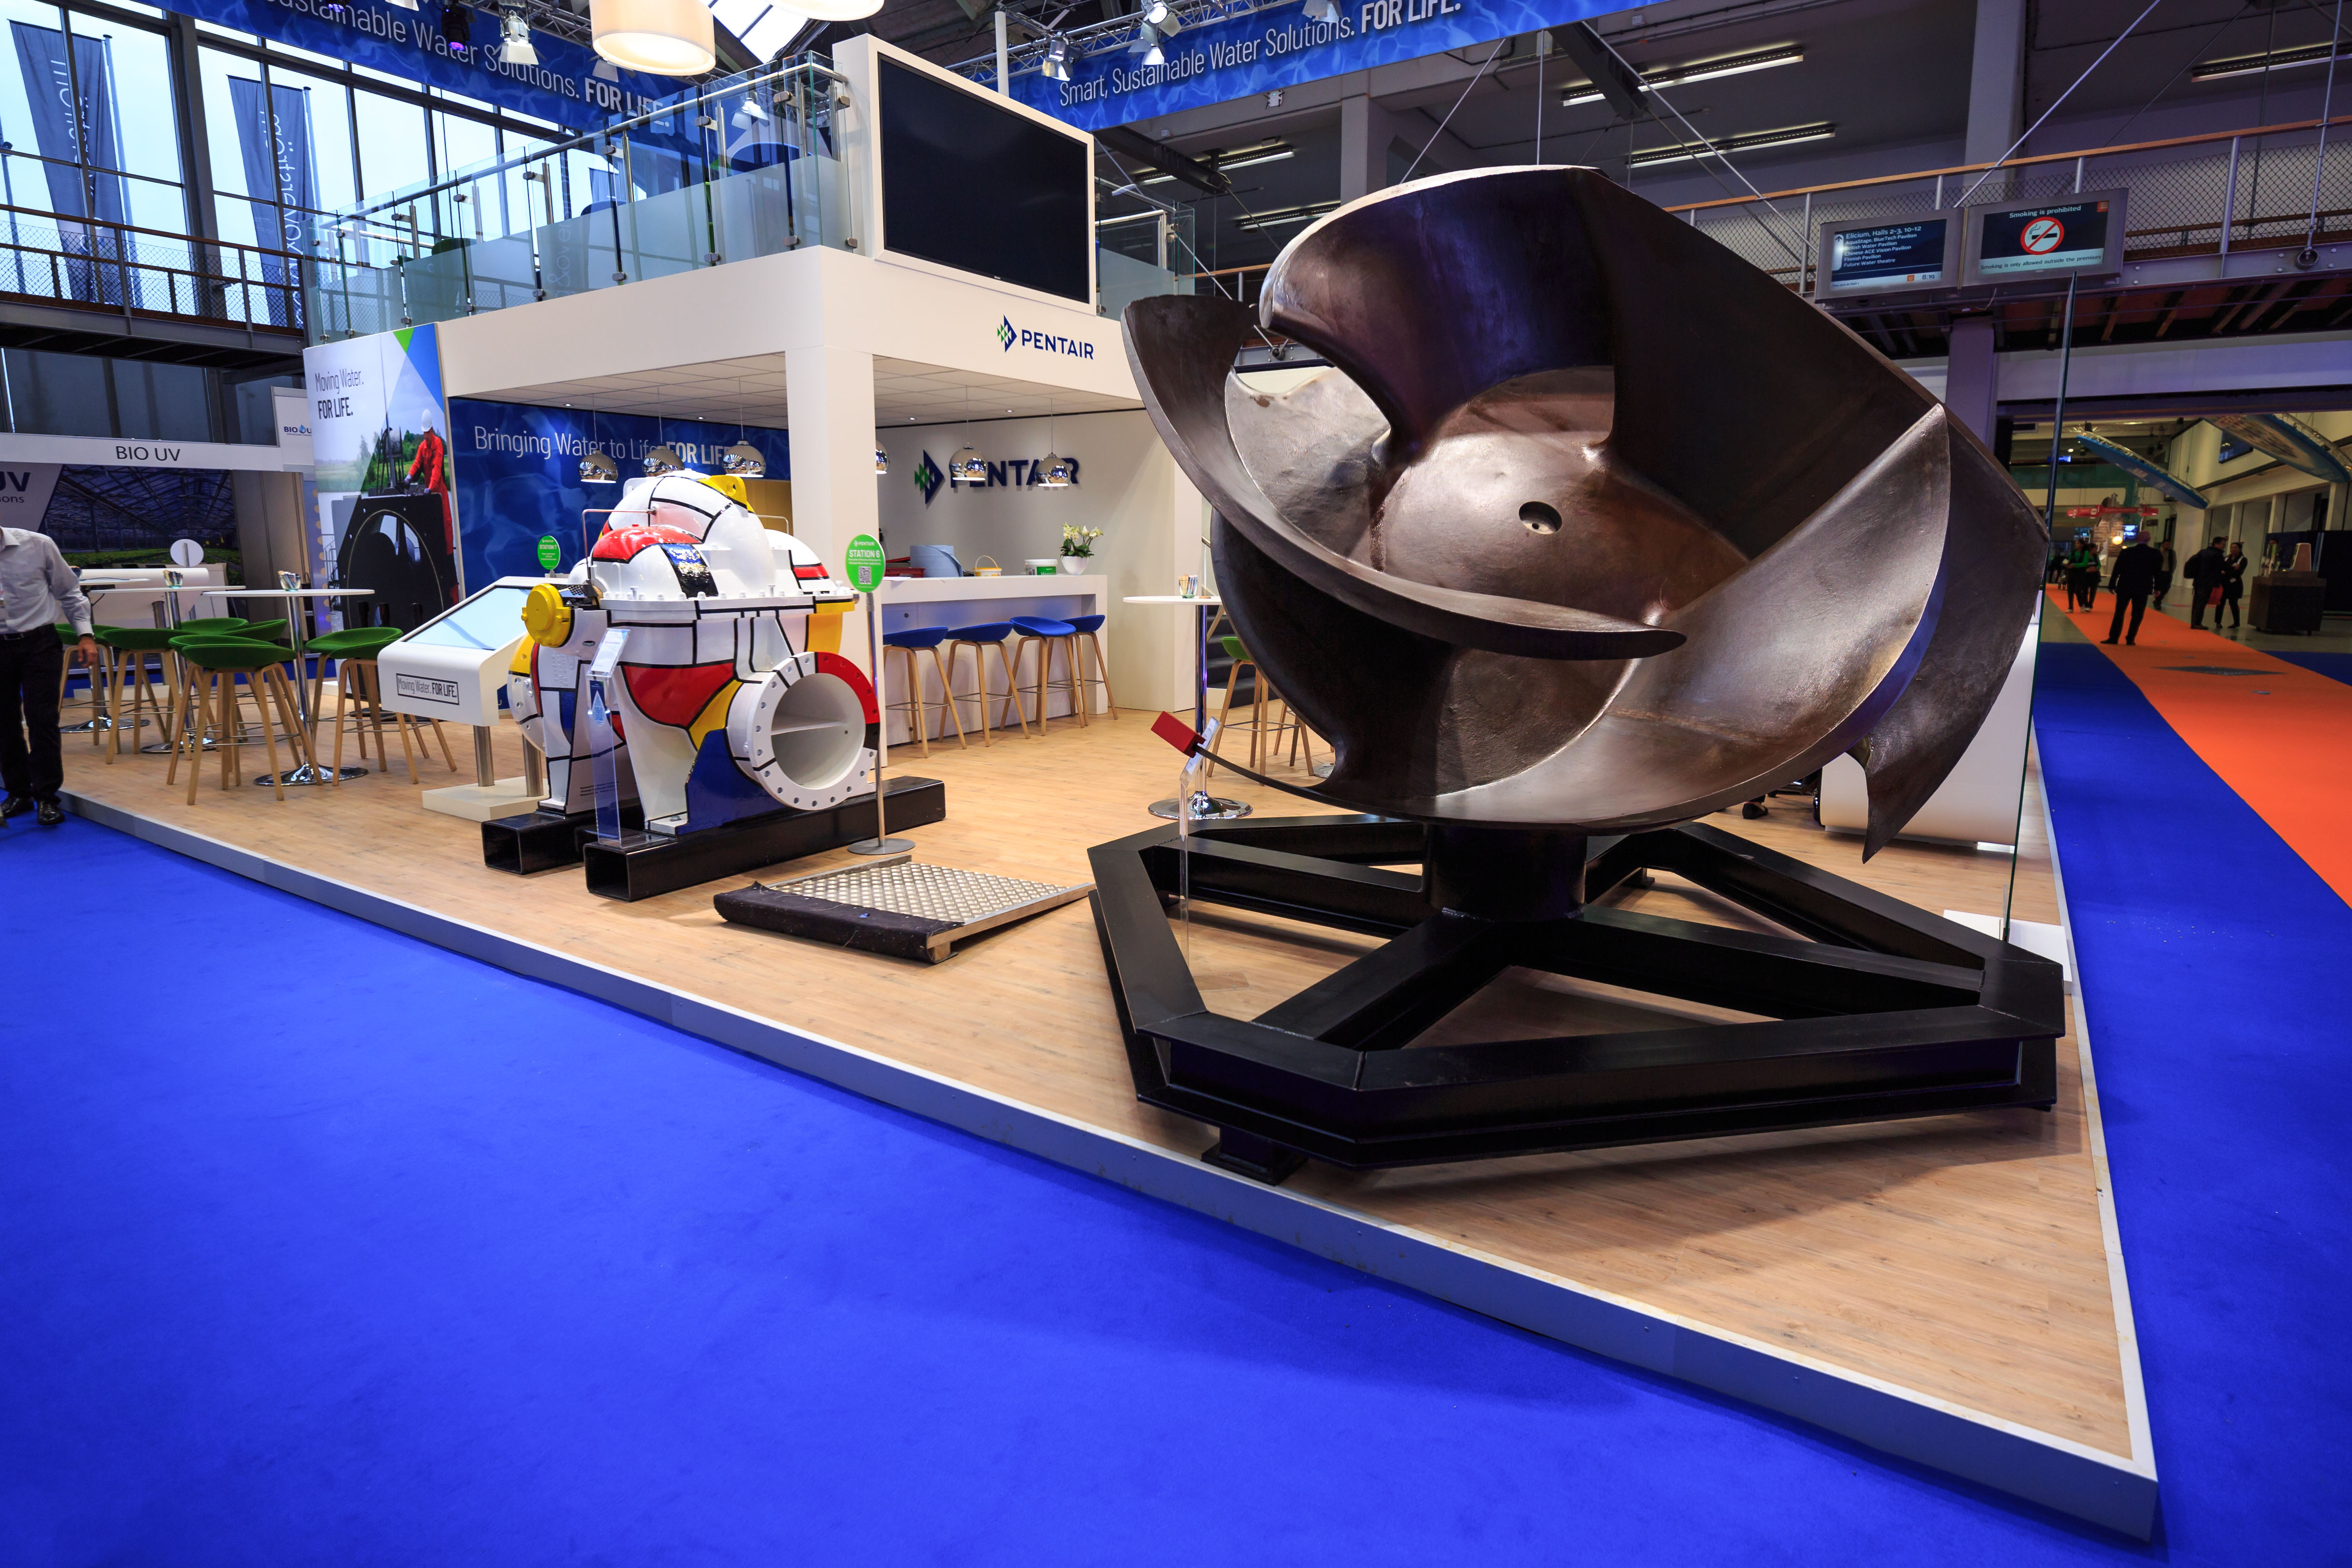 The large fish-friendly flood control impeller was on display at Aquatech Amsterdam.